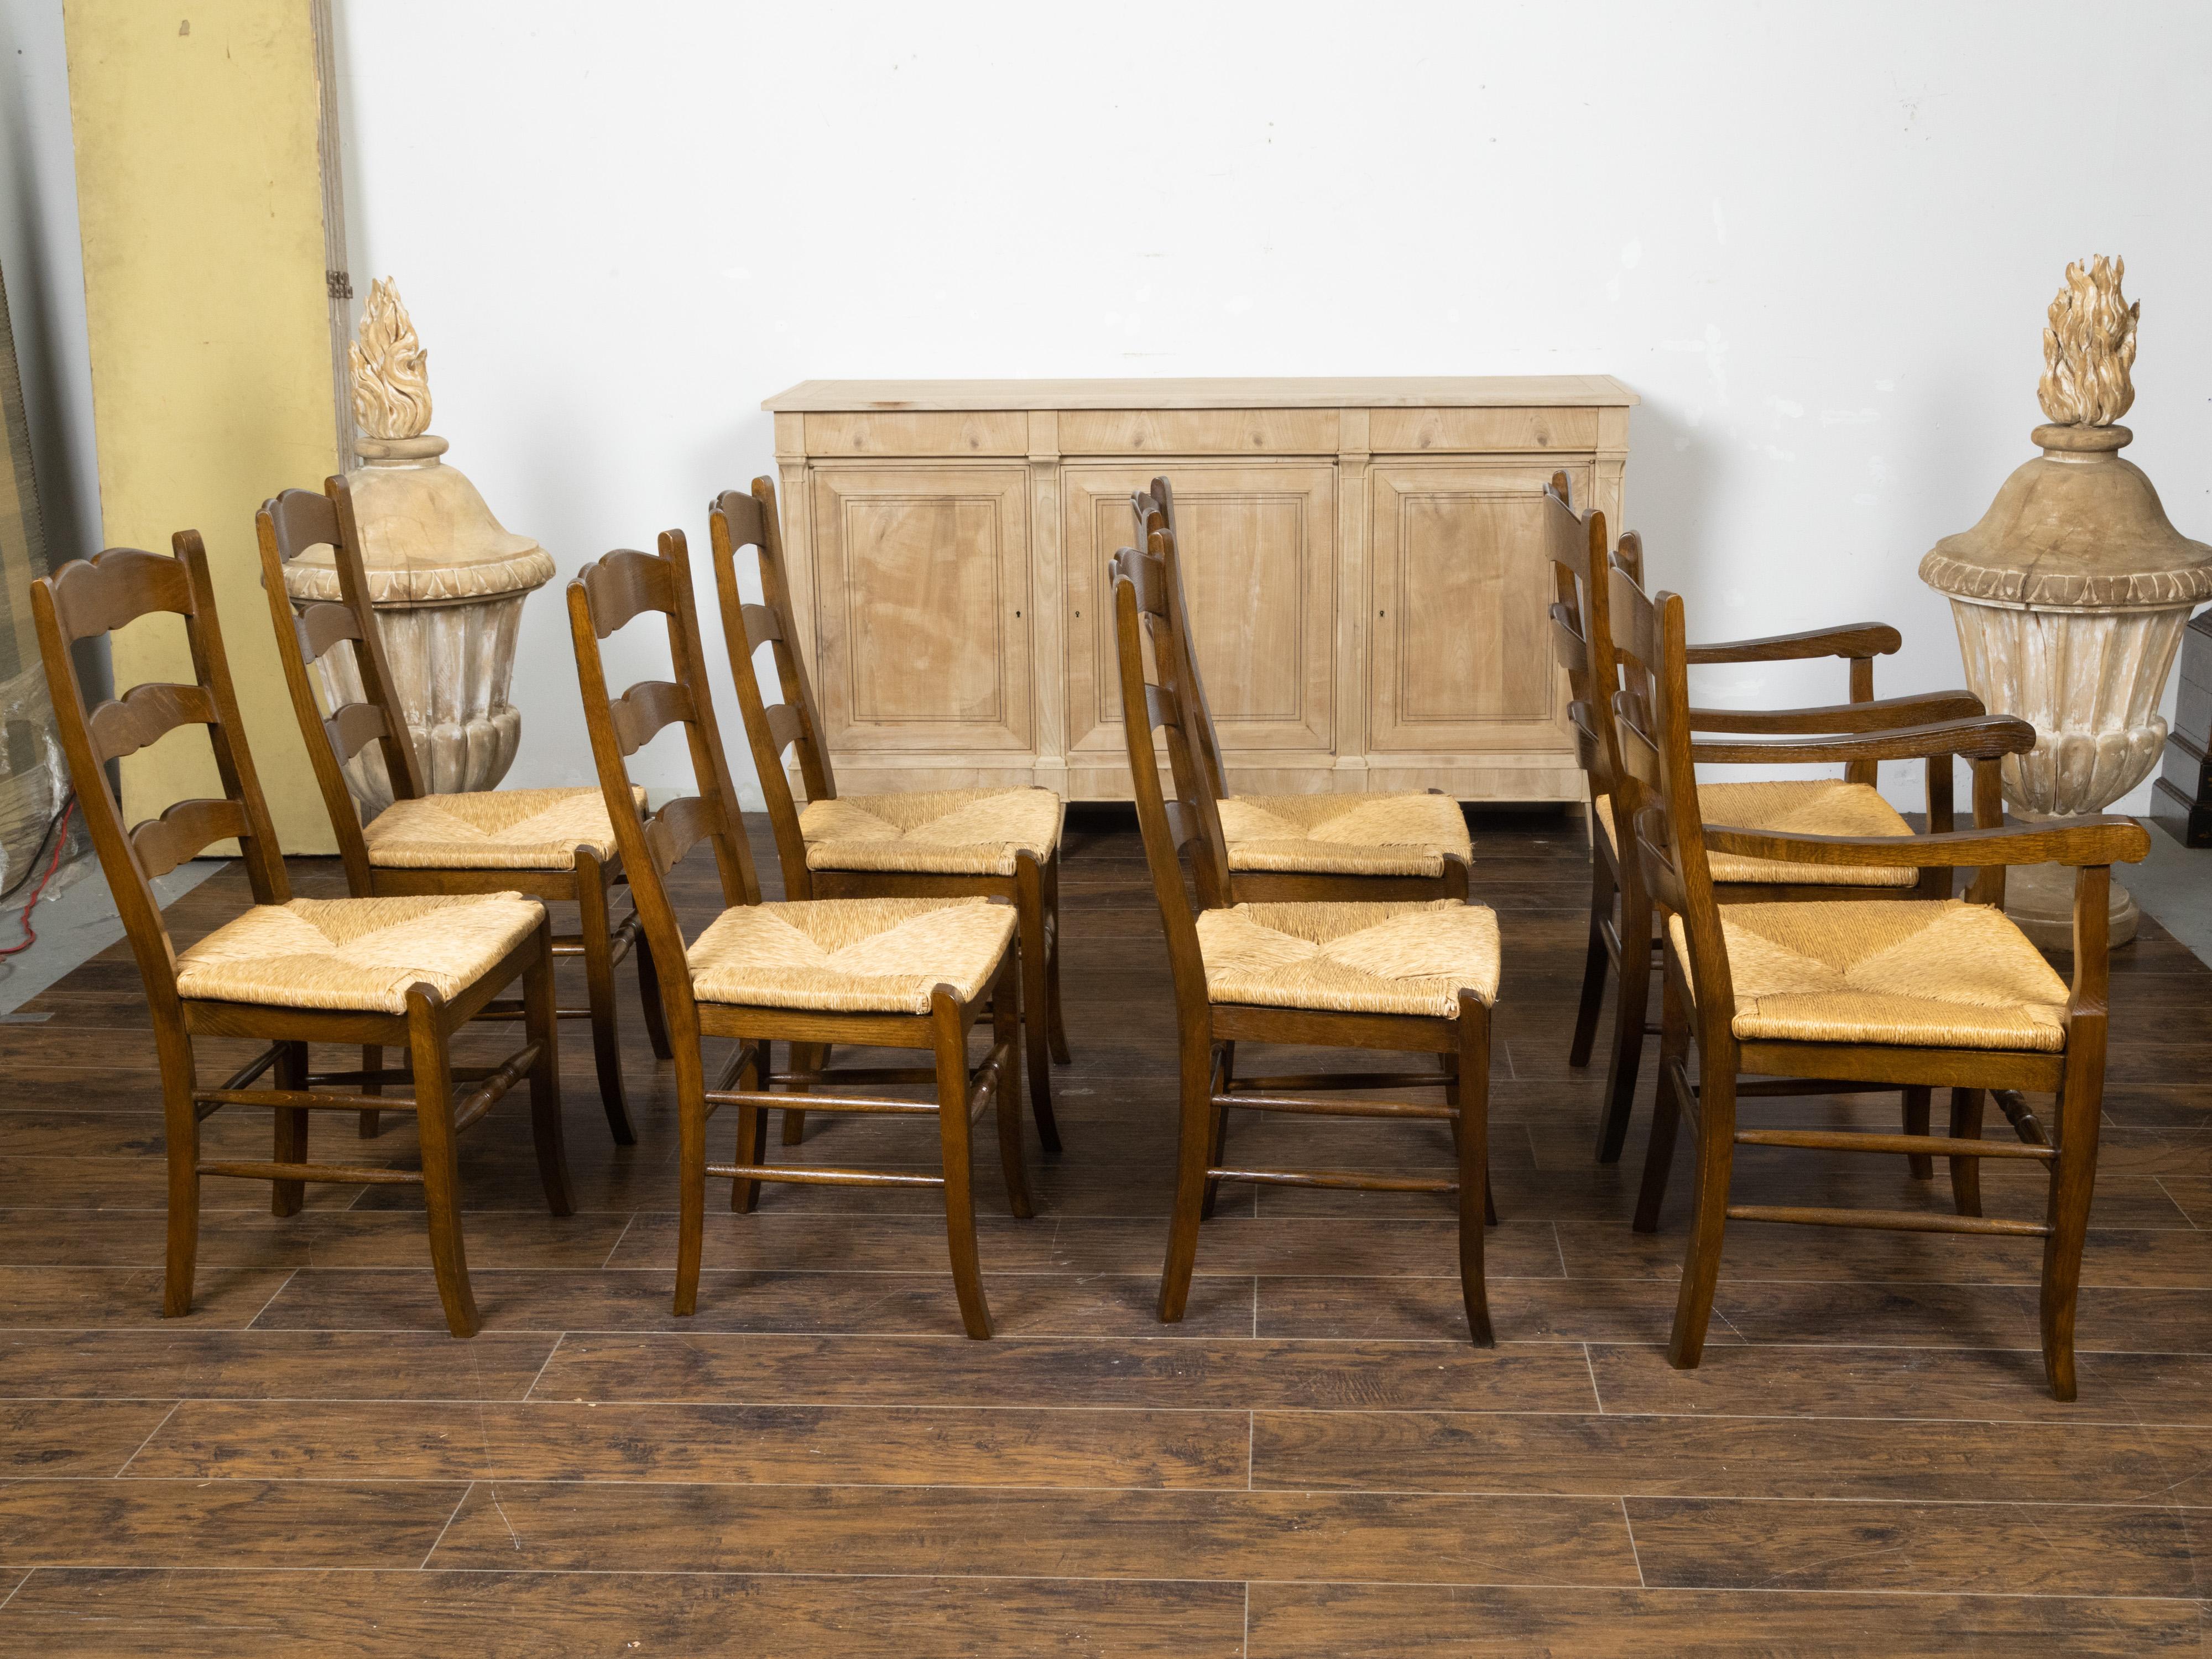 English Set of Eight Turn of the Century Oak Ladderback Dining Chairs with Rush Seats